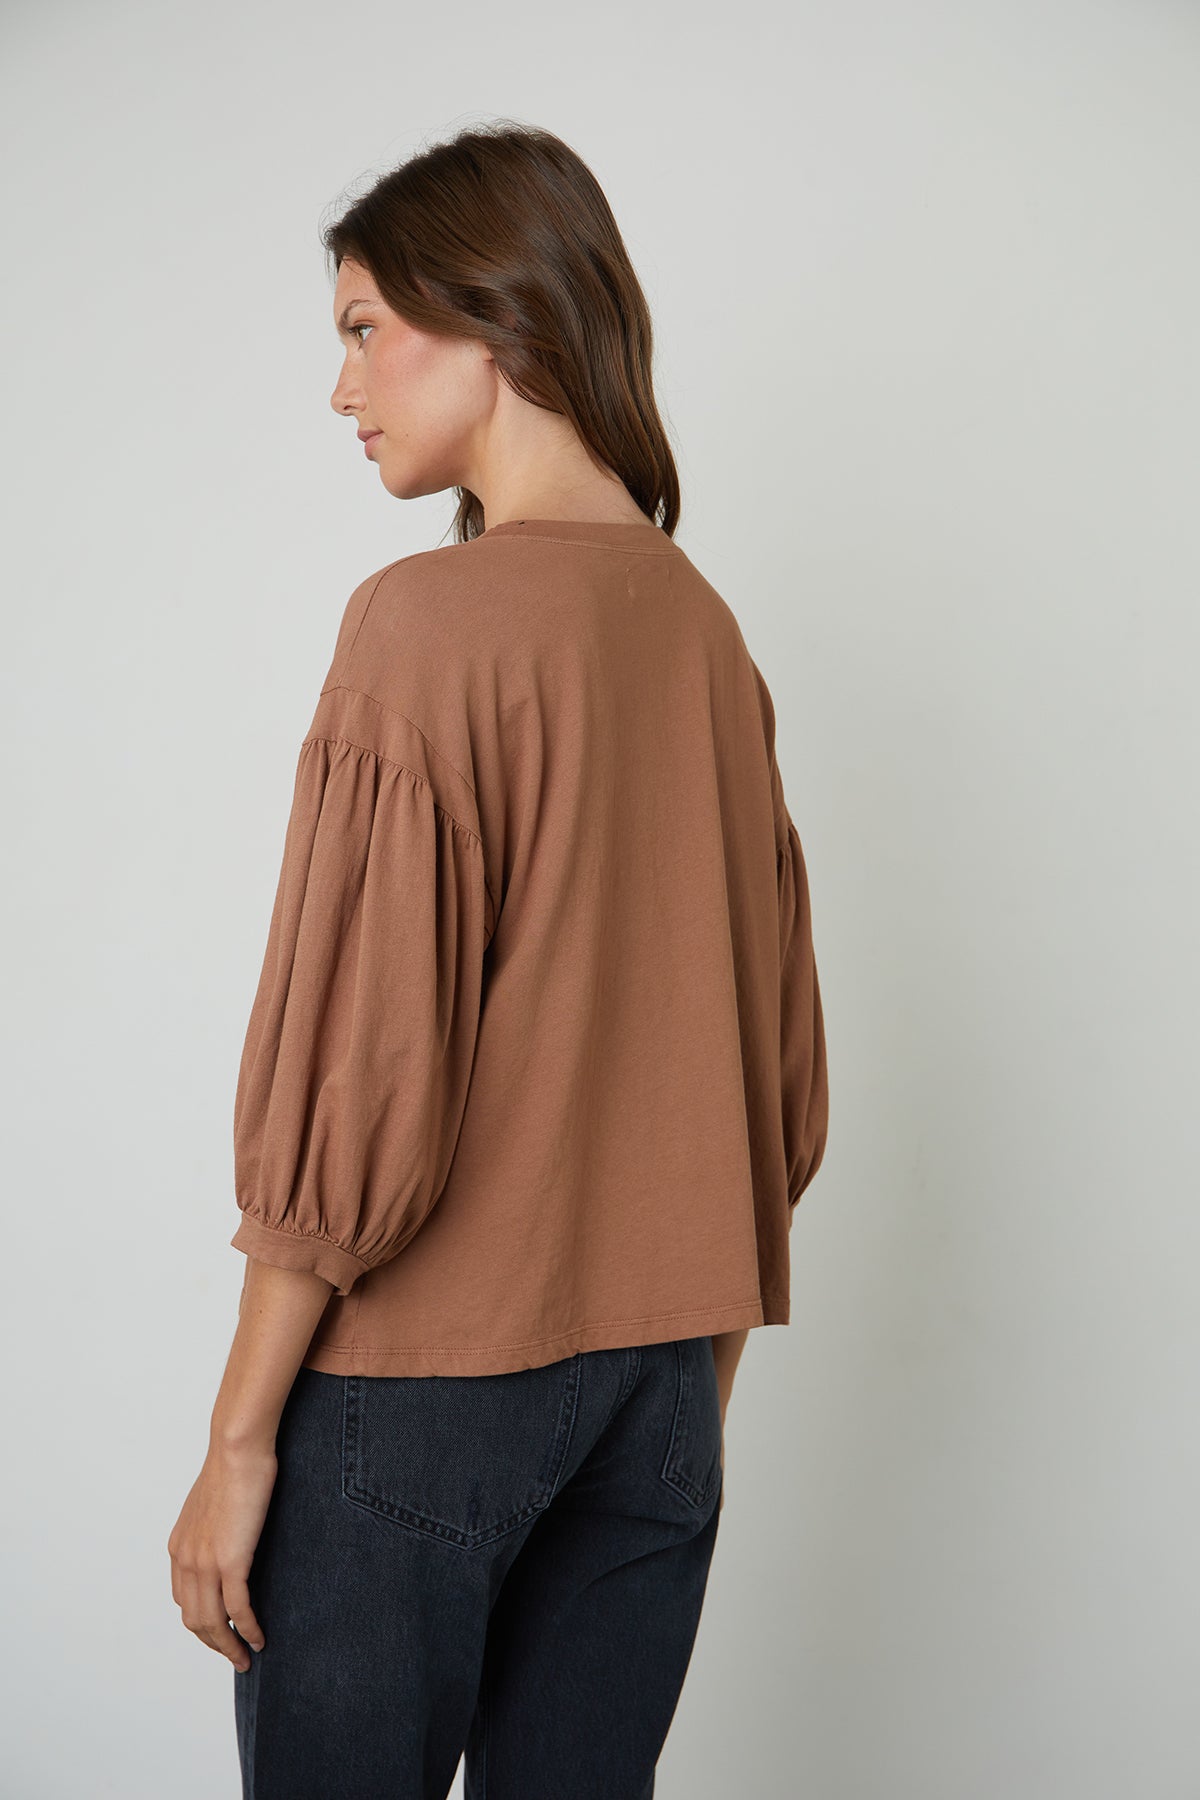 The back view of a woman wearing a Velvet by Graham & Spencer PRUDY 3/4 SLEEVE TEE that adds volume to her overall aesthetic.-25577590194369